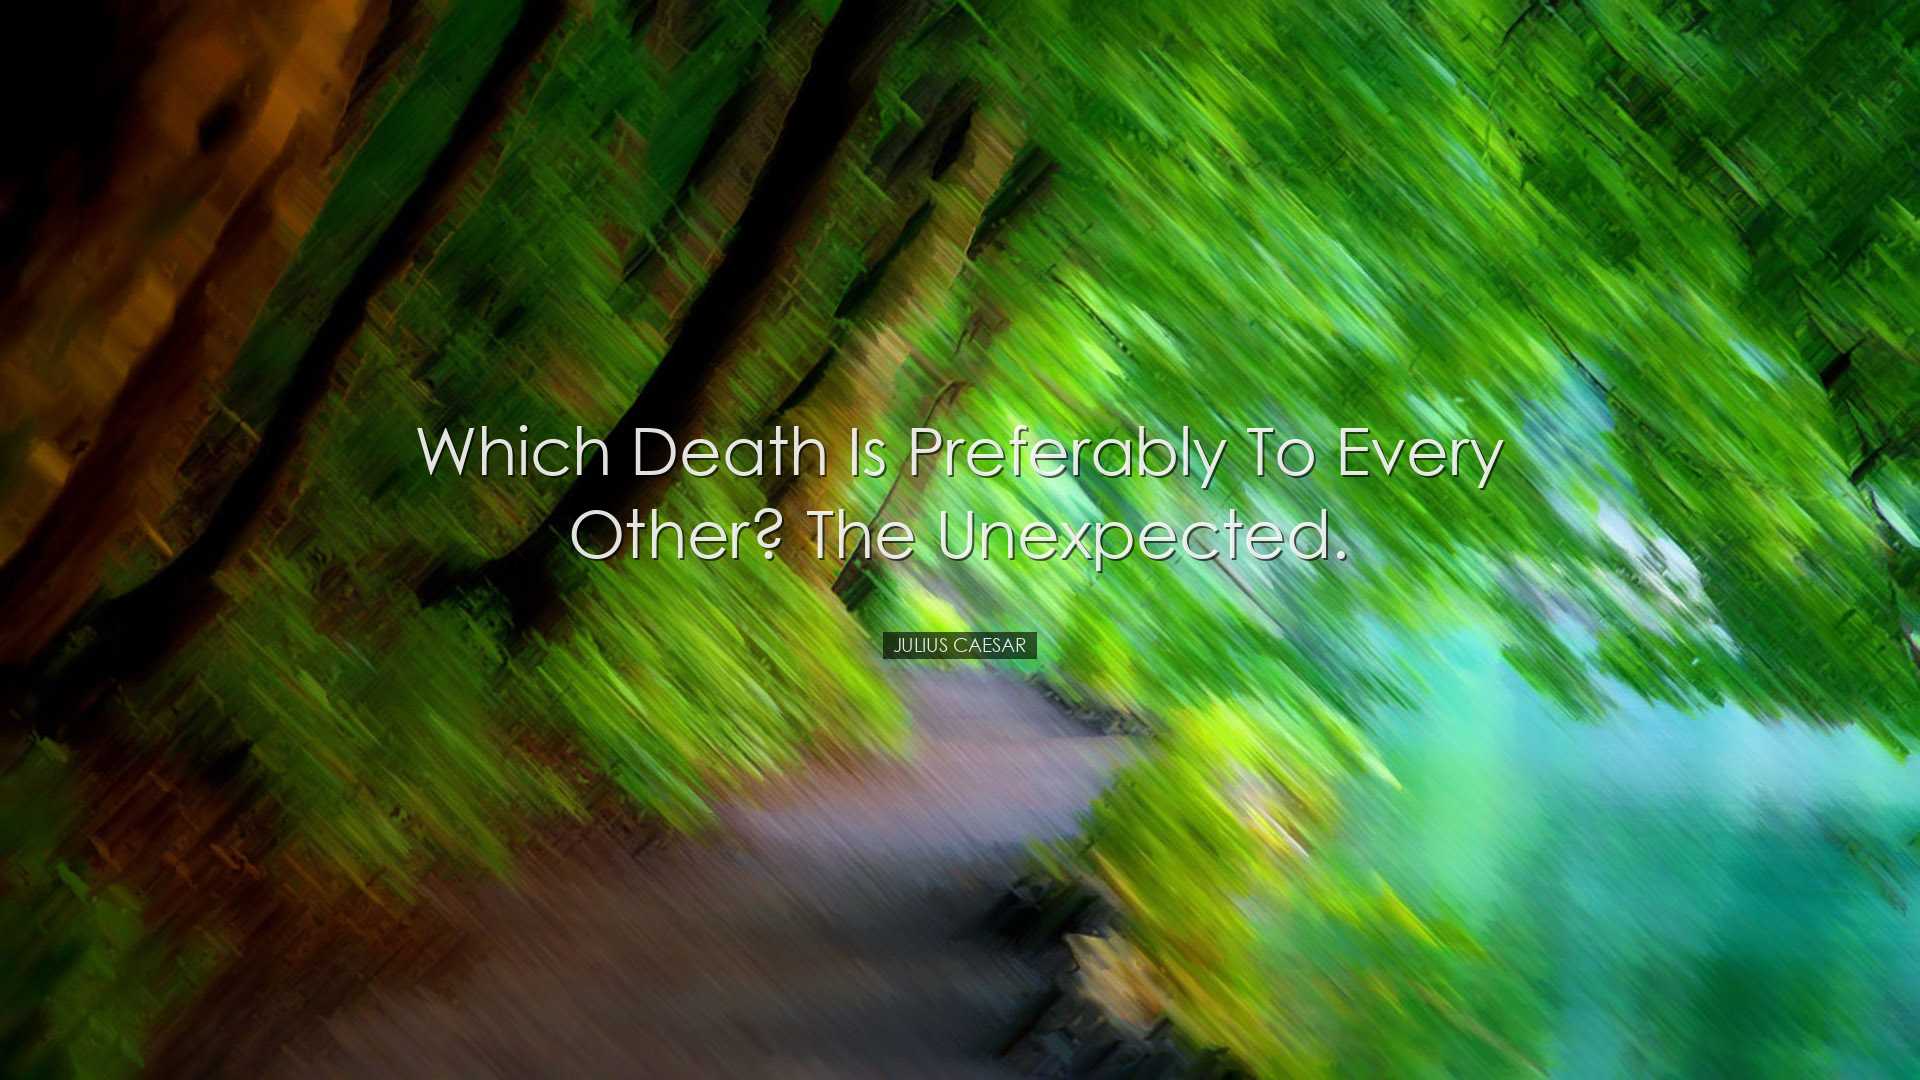 Which death is preferably to every other? The unexpected. - Julius